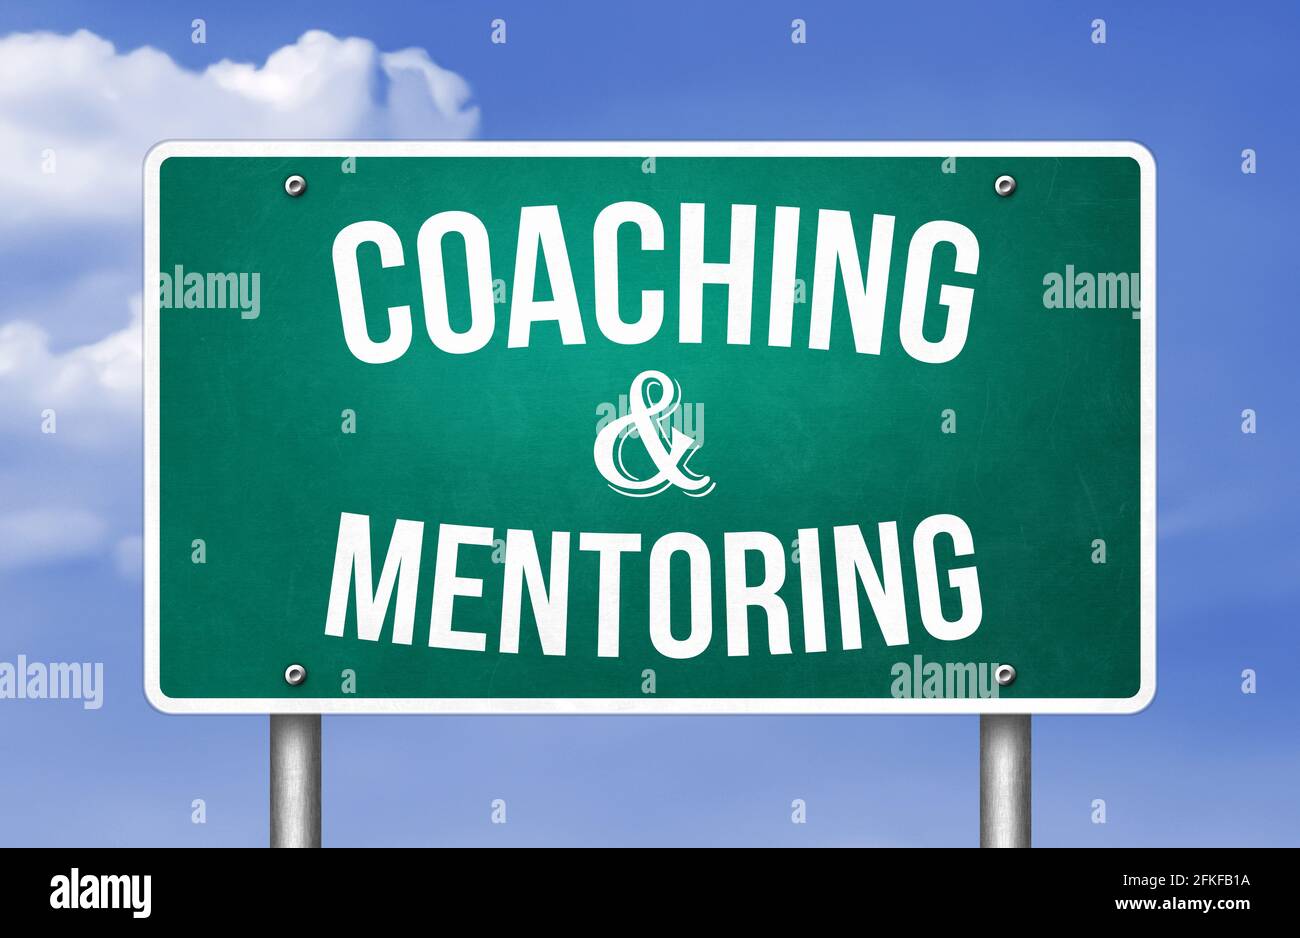 Coaching and Mentoring - road sign illustration Stock Photo